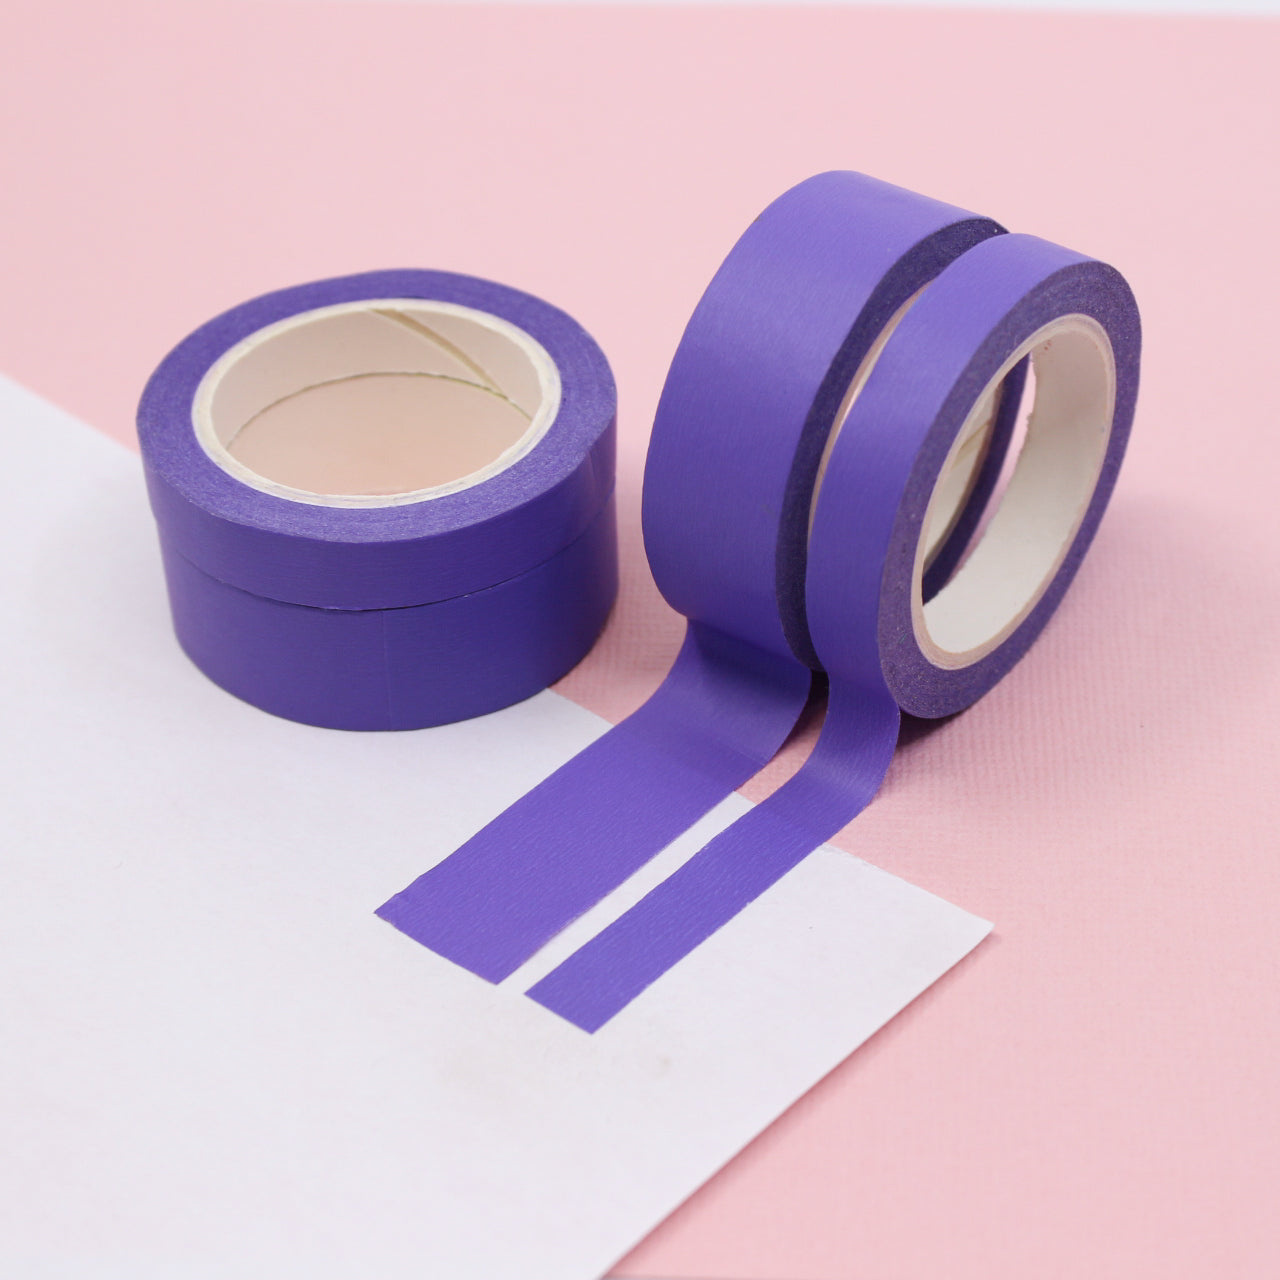 This neon purple washi tape is vibrant and fun. This washi tape is part of our solid neon thick-thin matching duo washi collection. Find the perfect color for any project in BBB Supplies' thick-thin solids collection, from neon to neutral to pastel and more. This tape is sold at BBB Supplies craft shop.